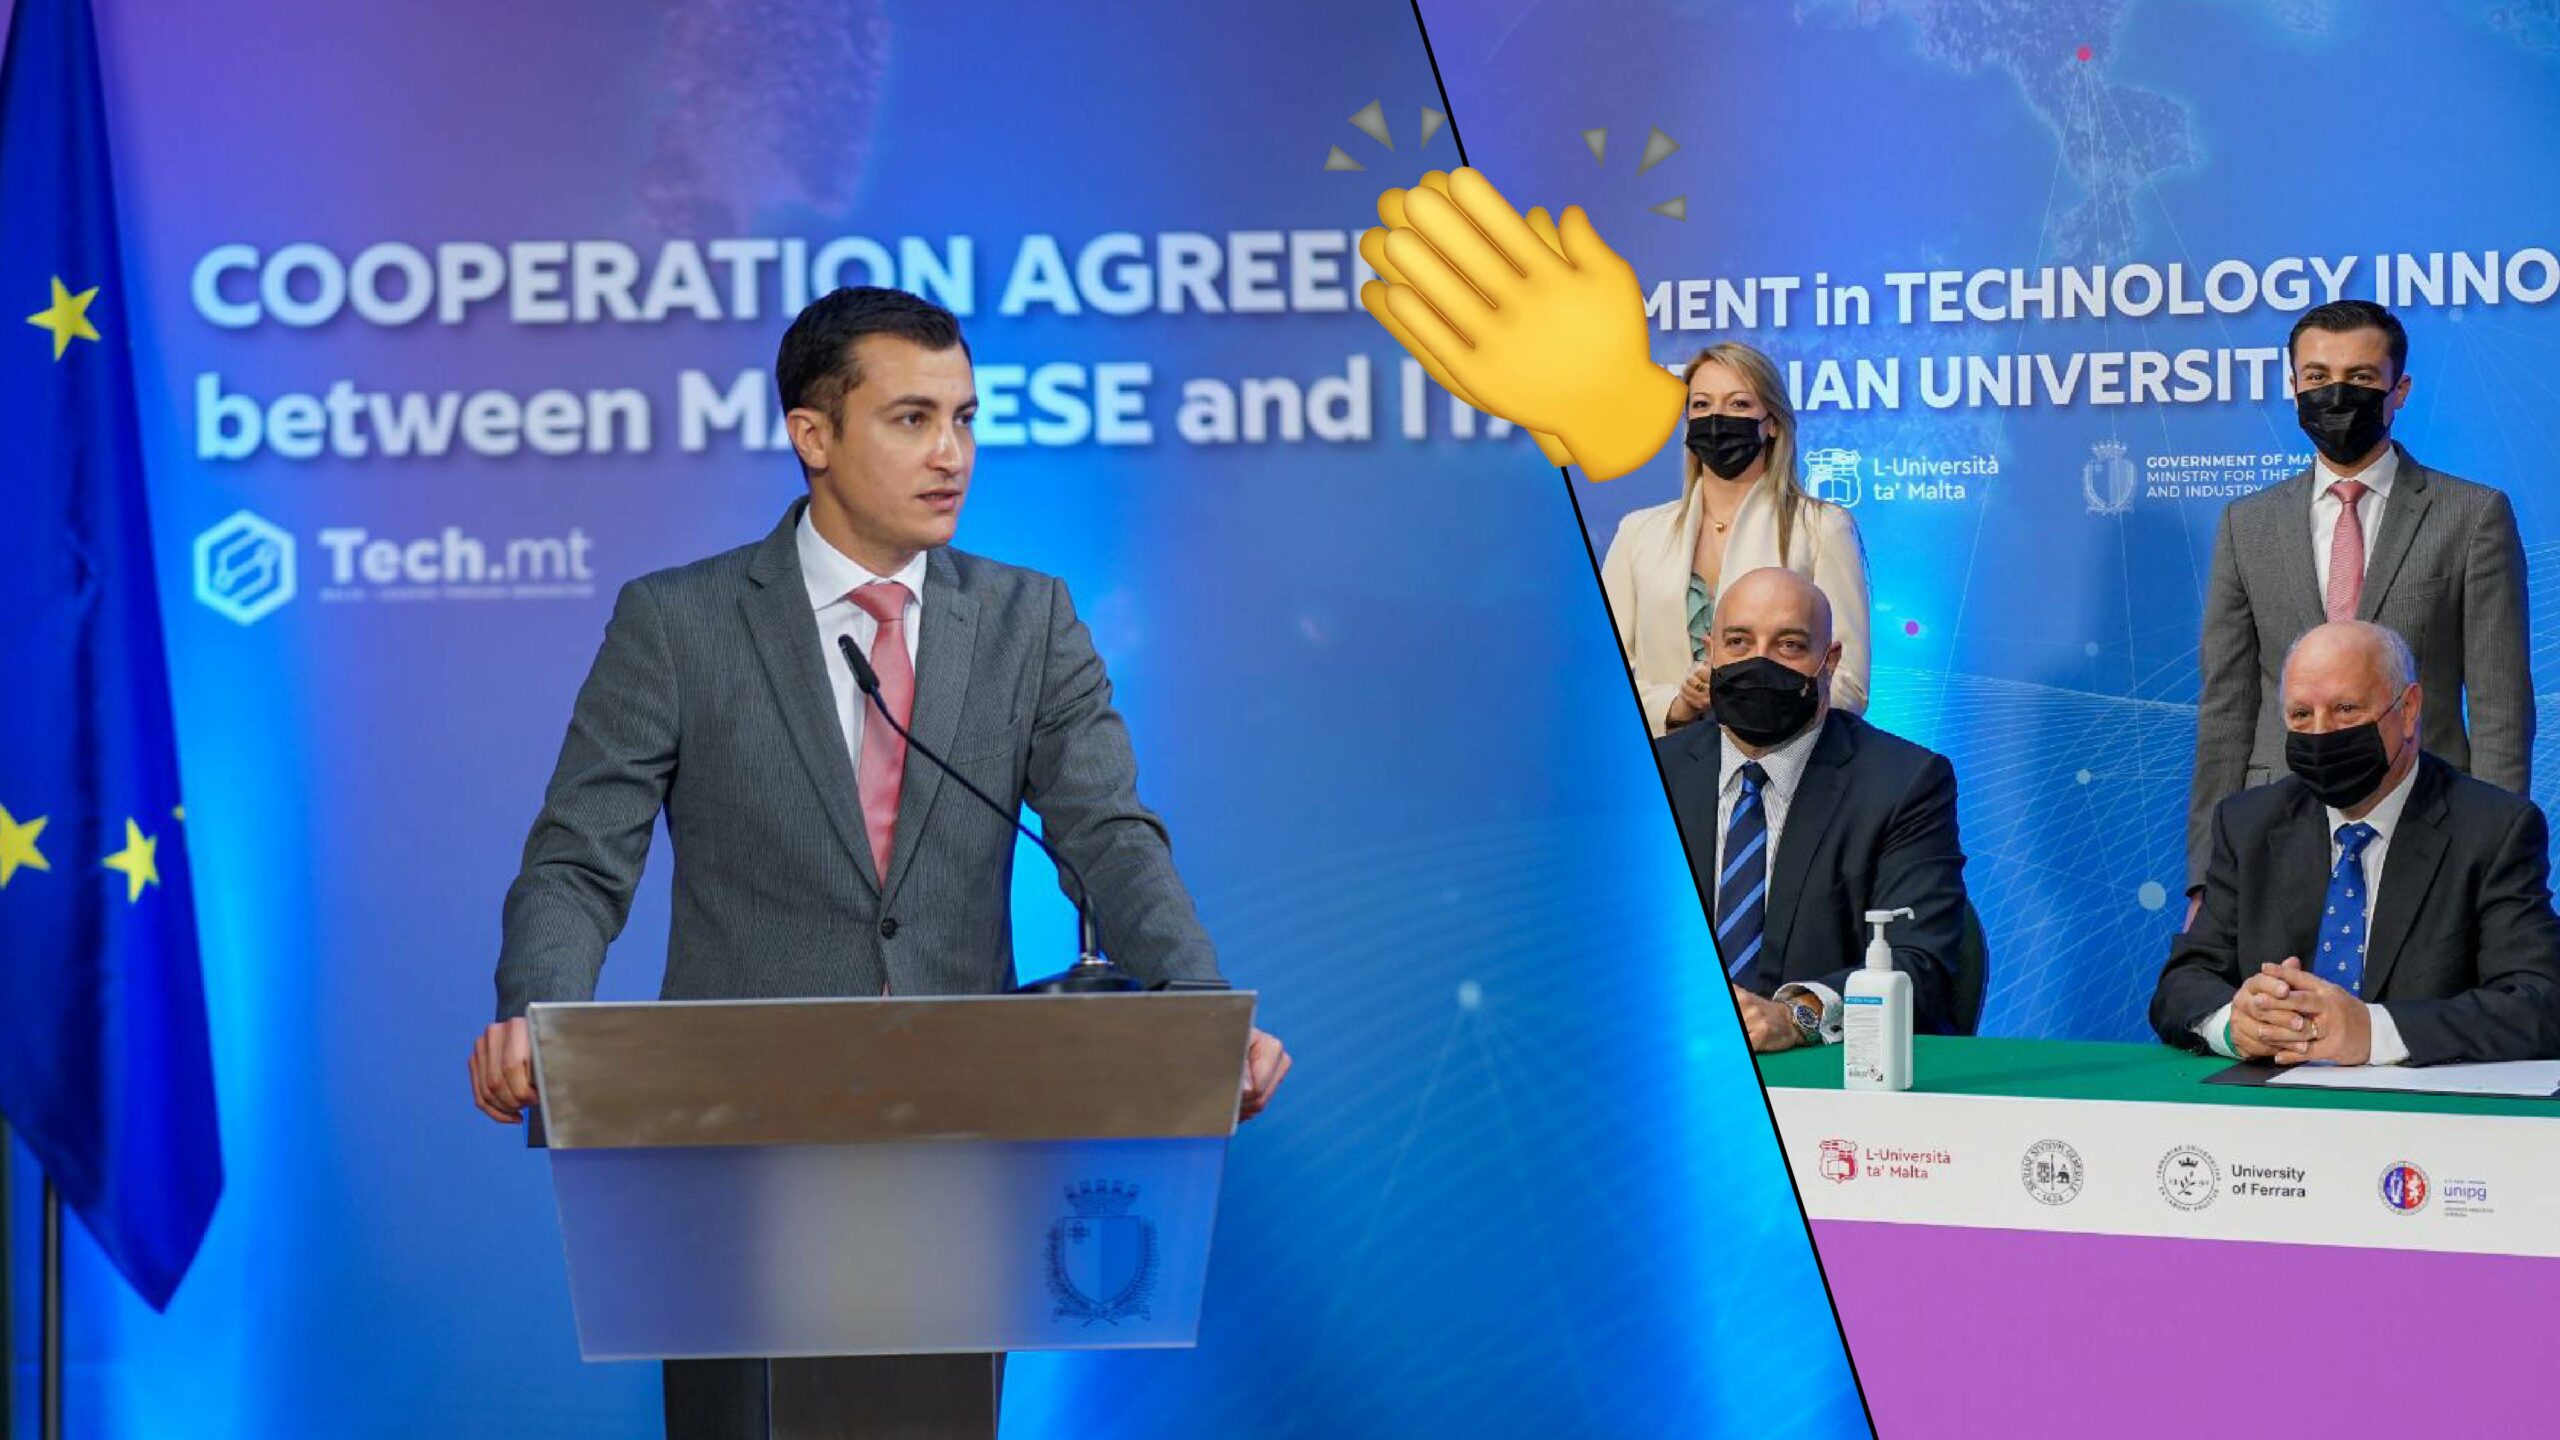 Cooperation agreement "shall open doors to exciting and envious opportunities" for students and graduates in tech industry